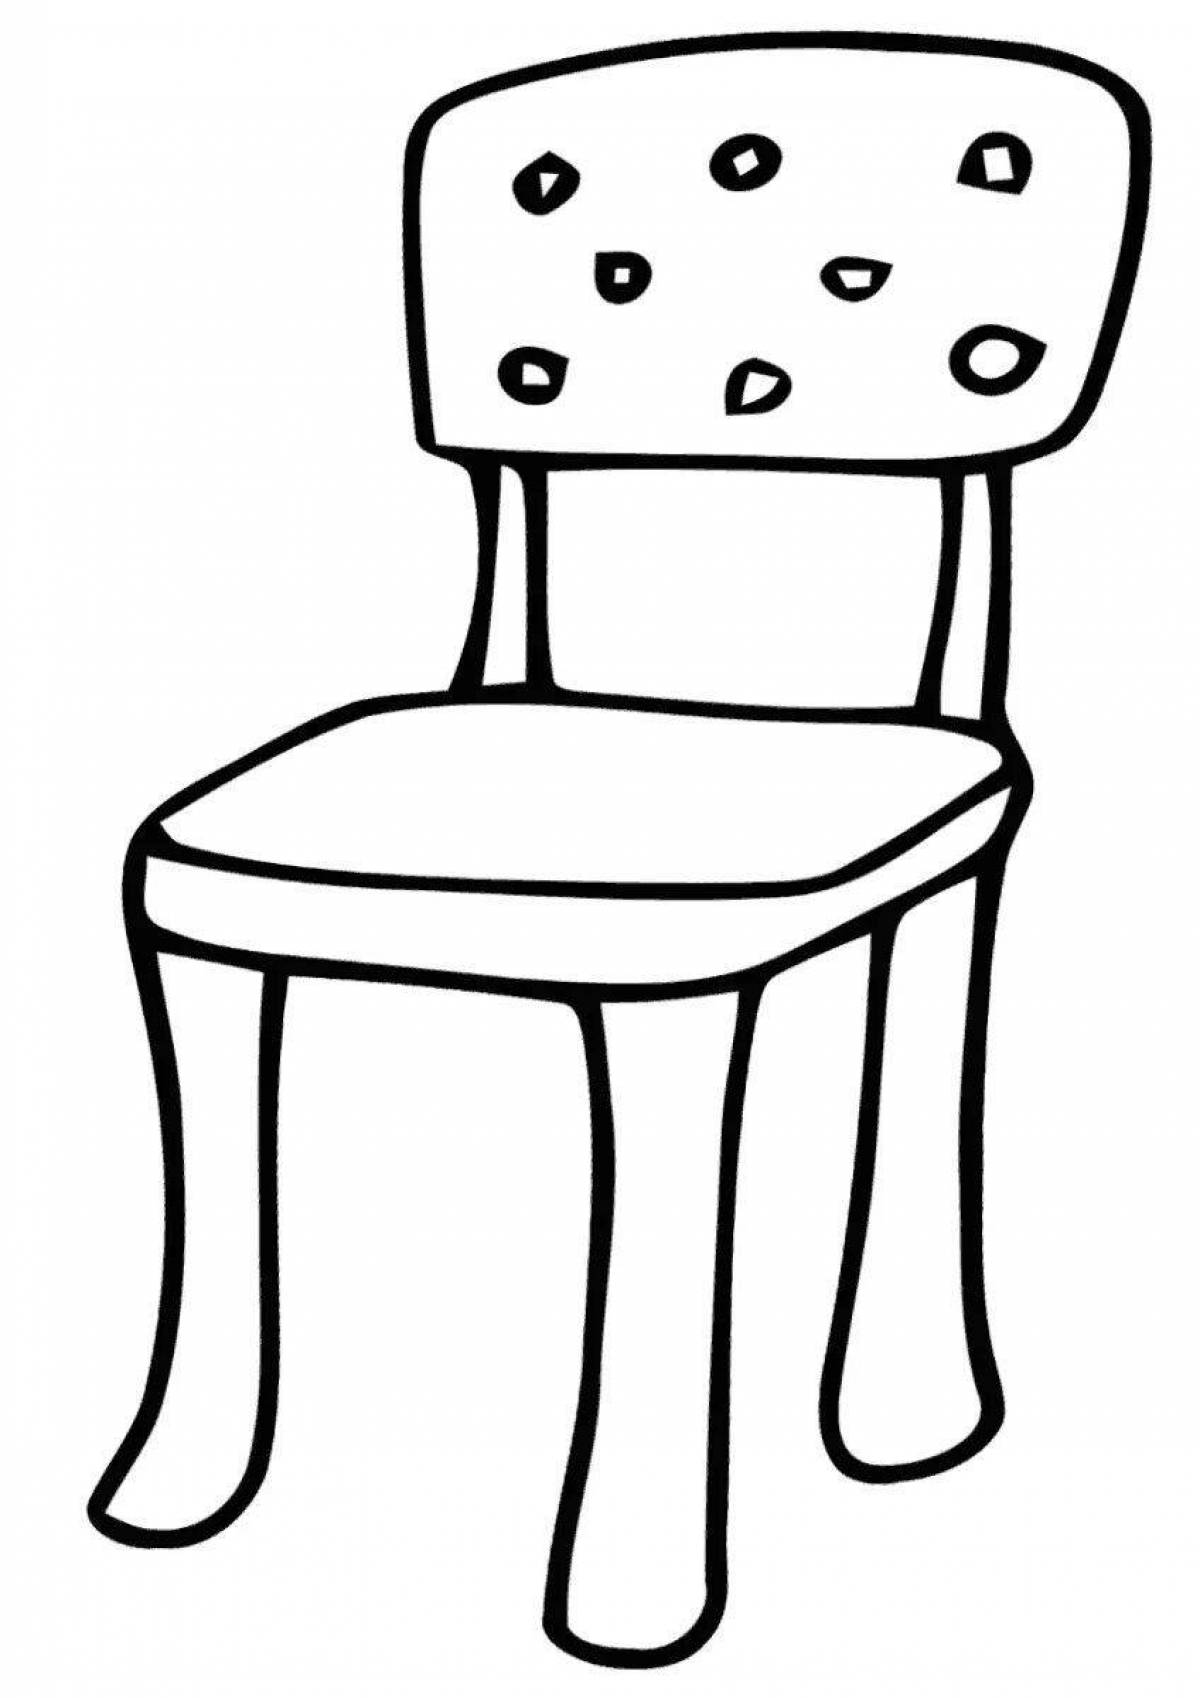 Intricate highchair coloring page